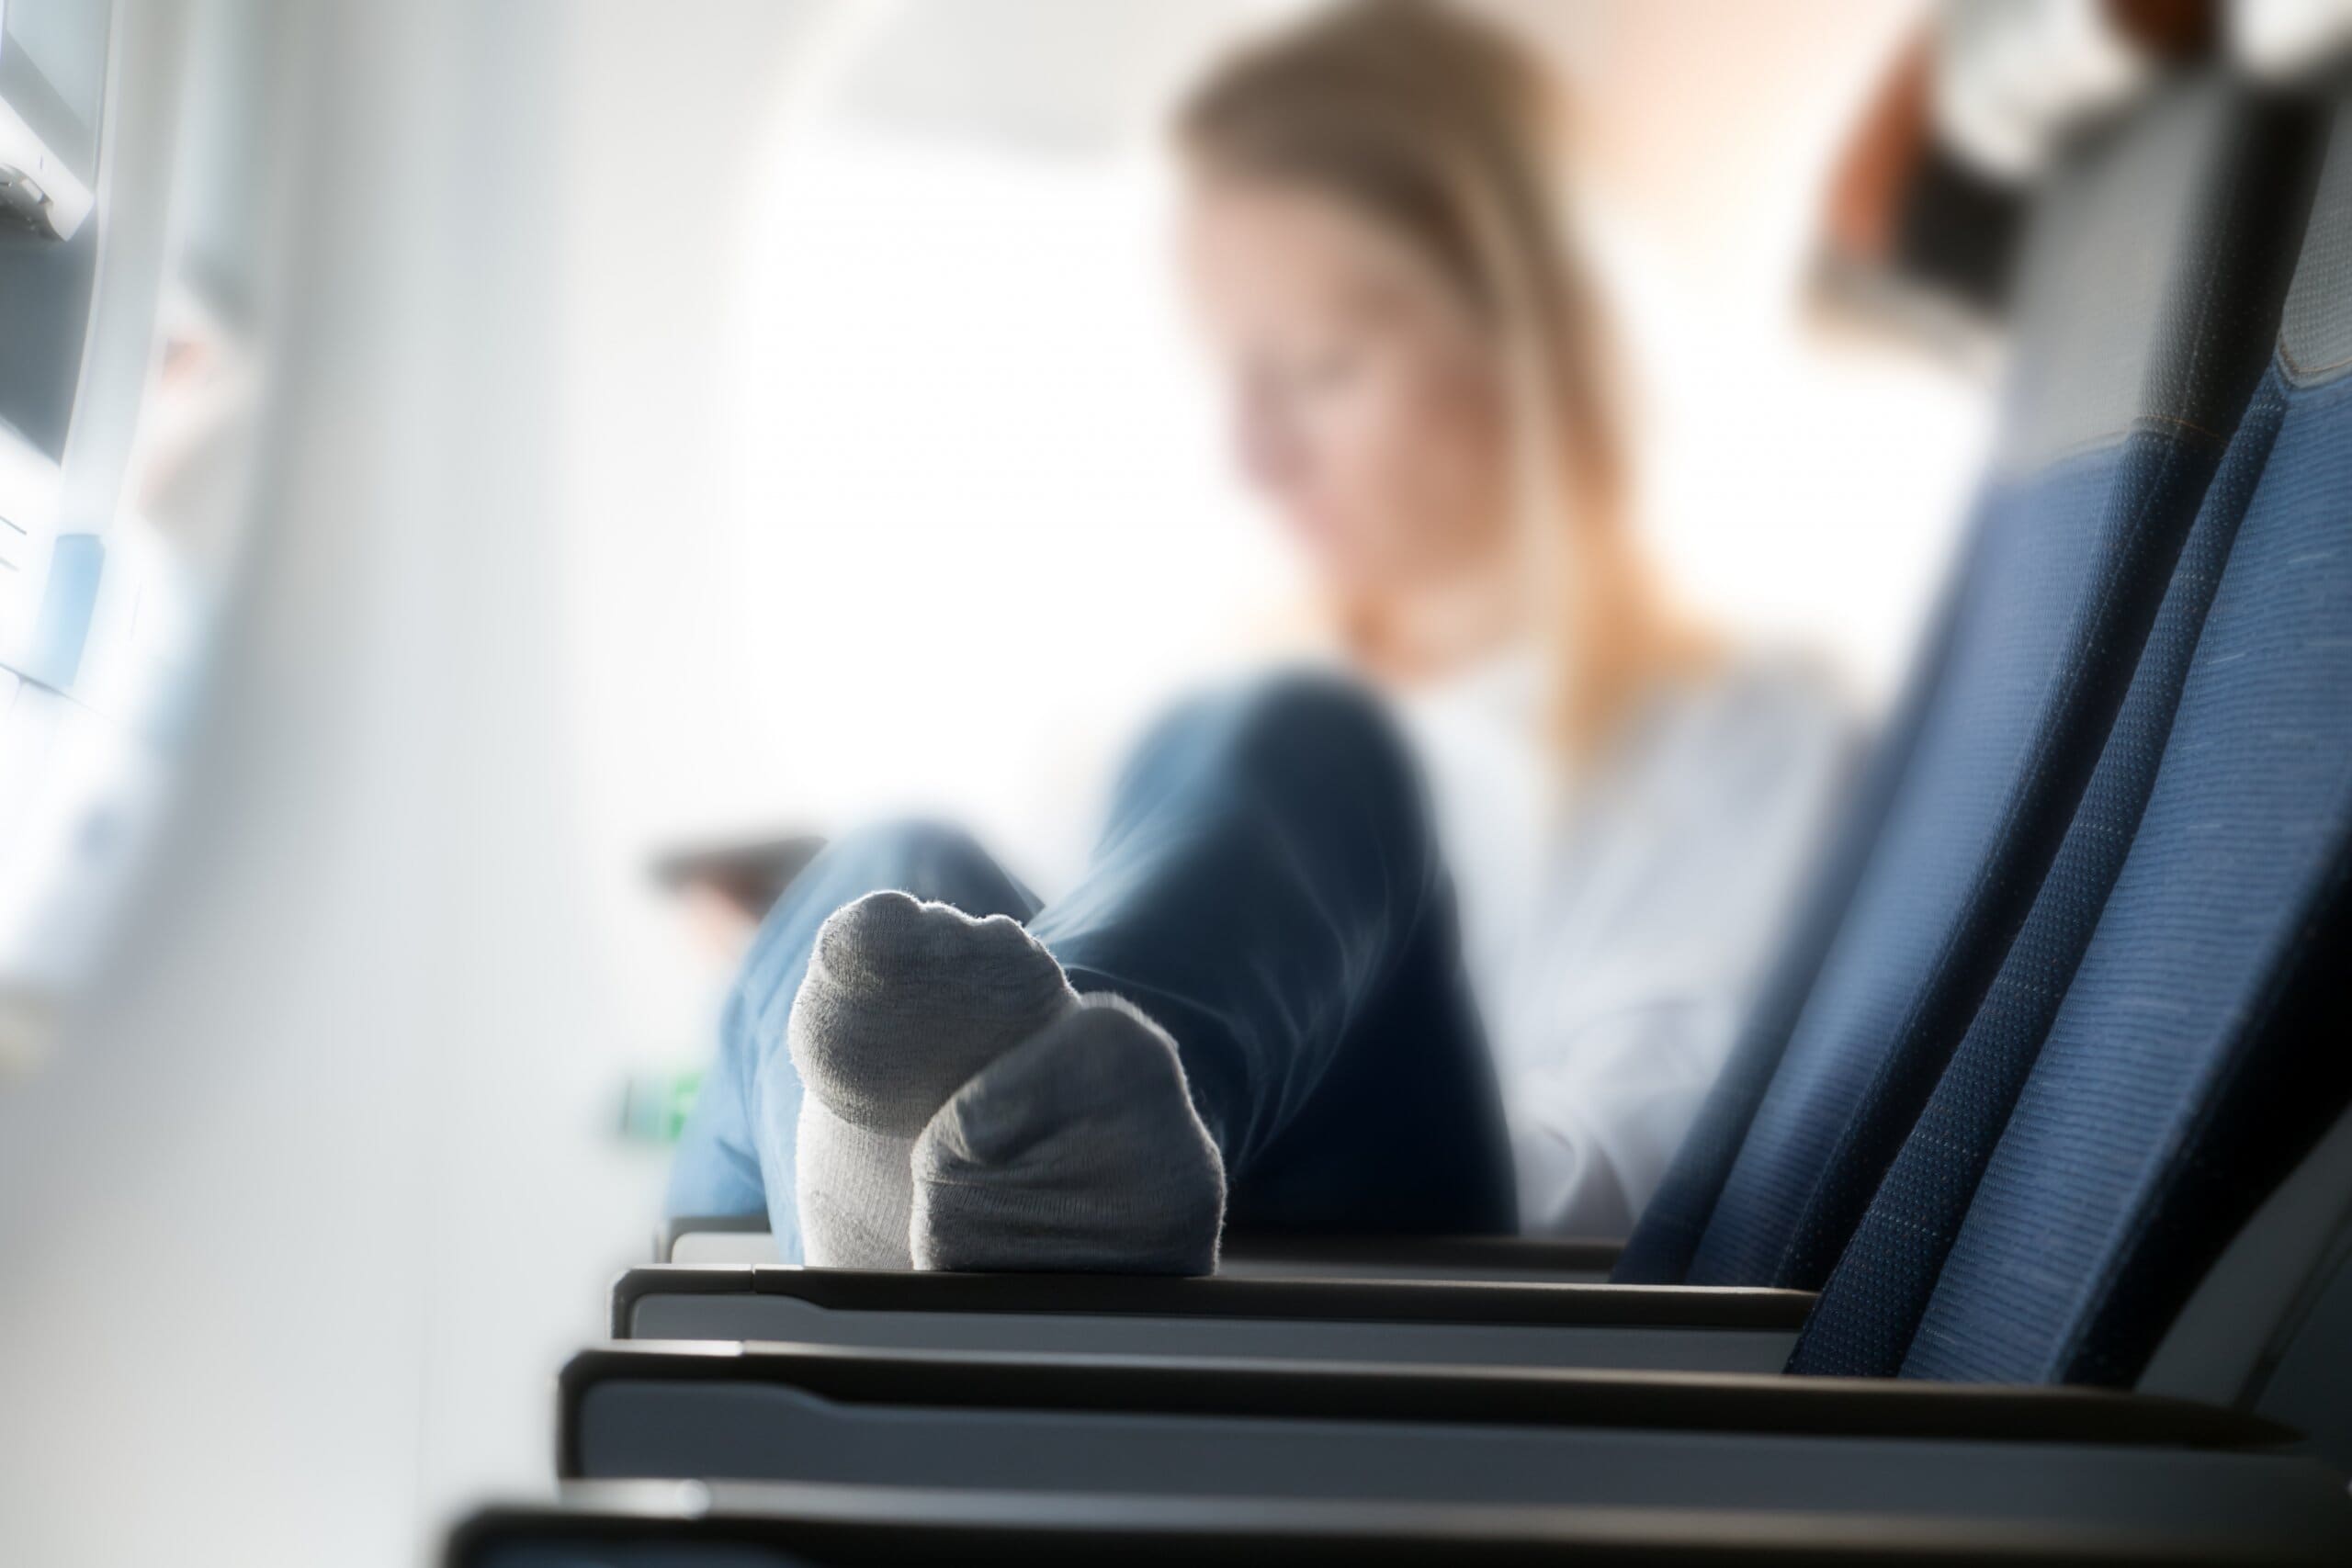 Woman sat on plane stretches out with socks on.